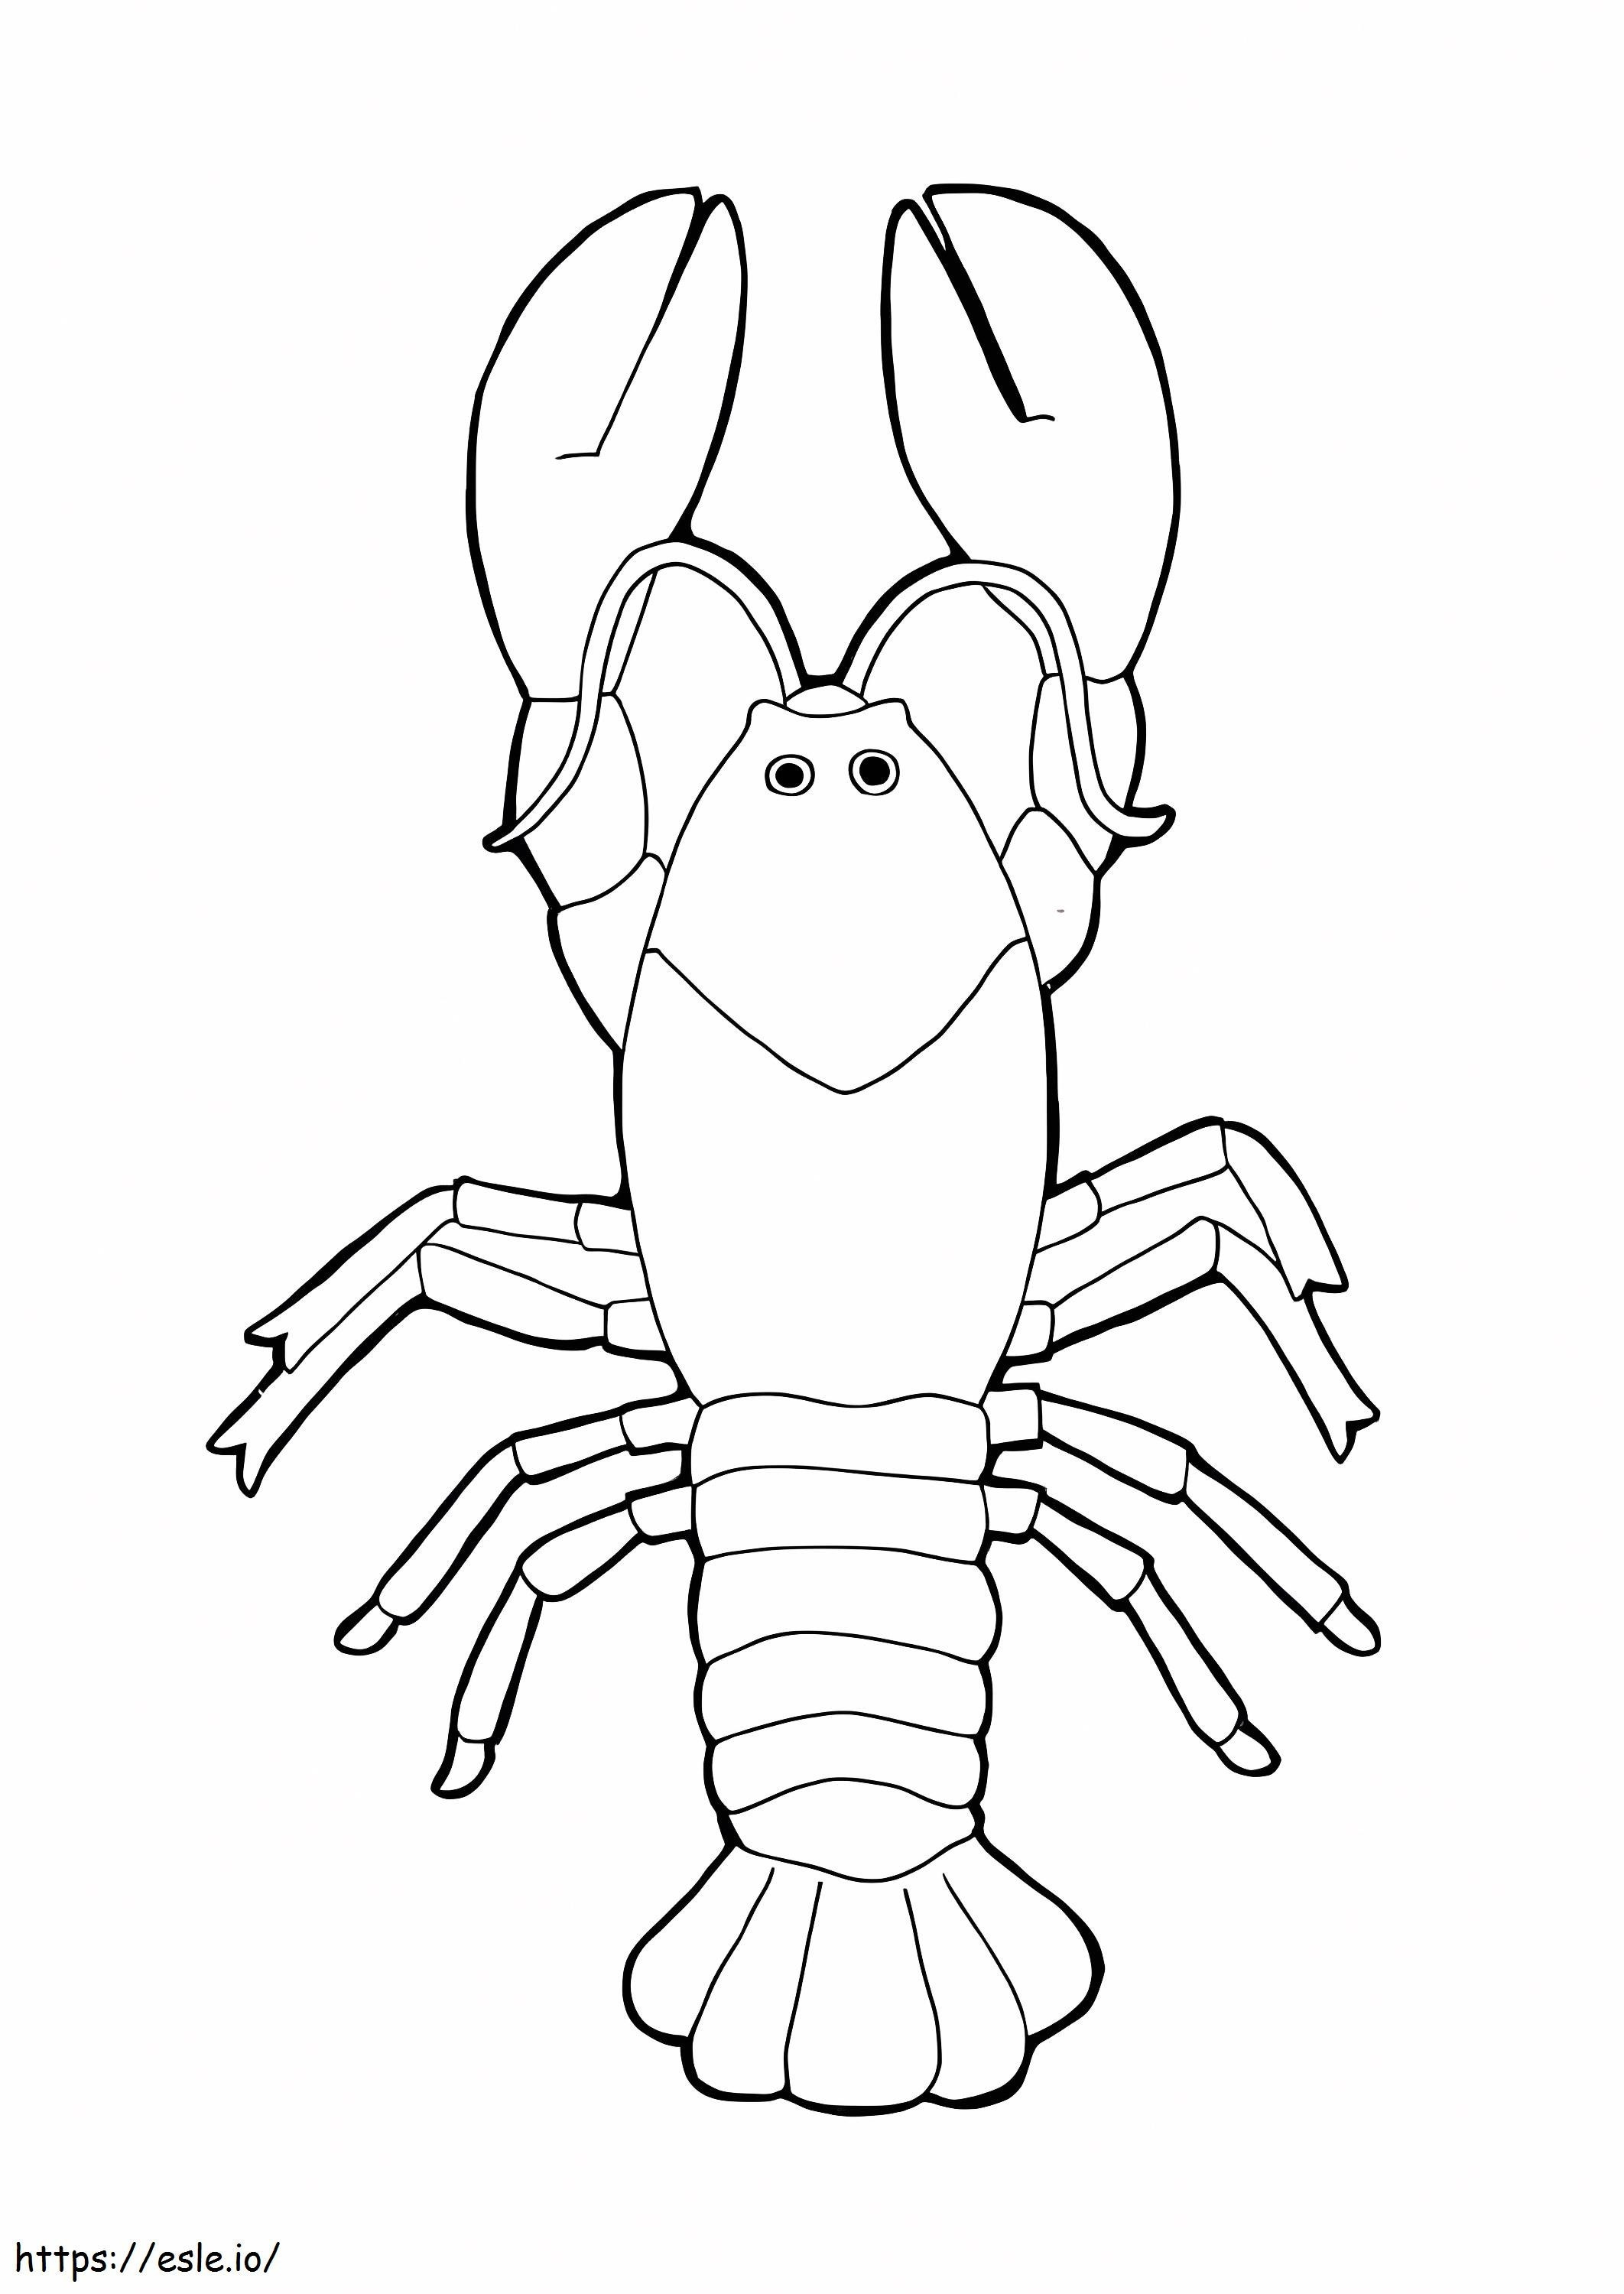 Adorable Lobster coloring page